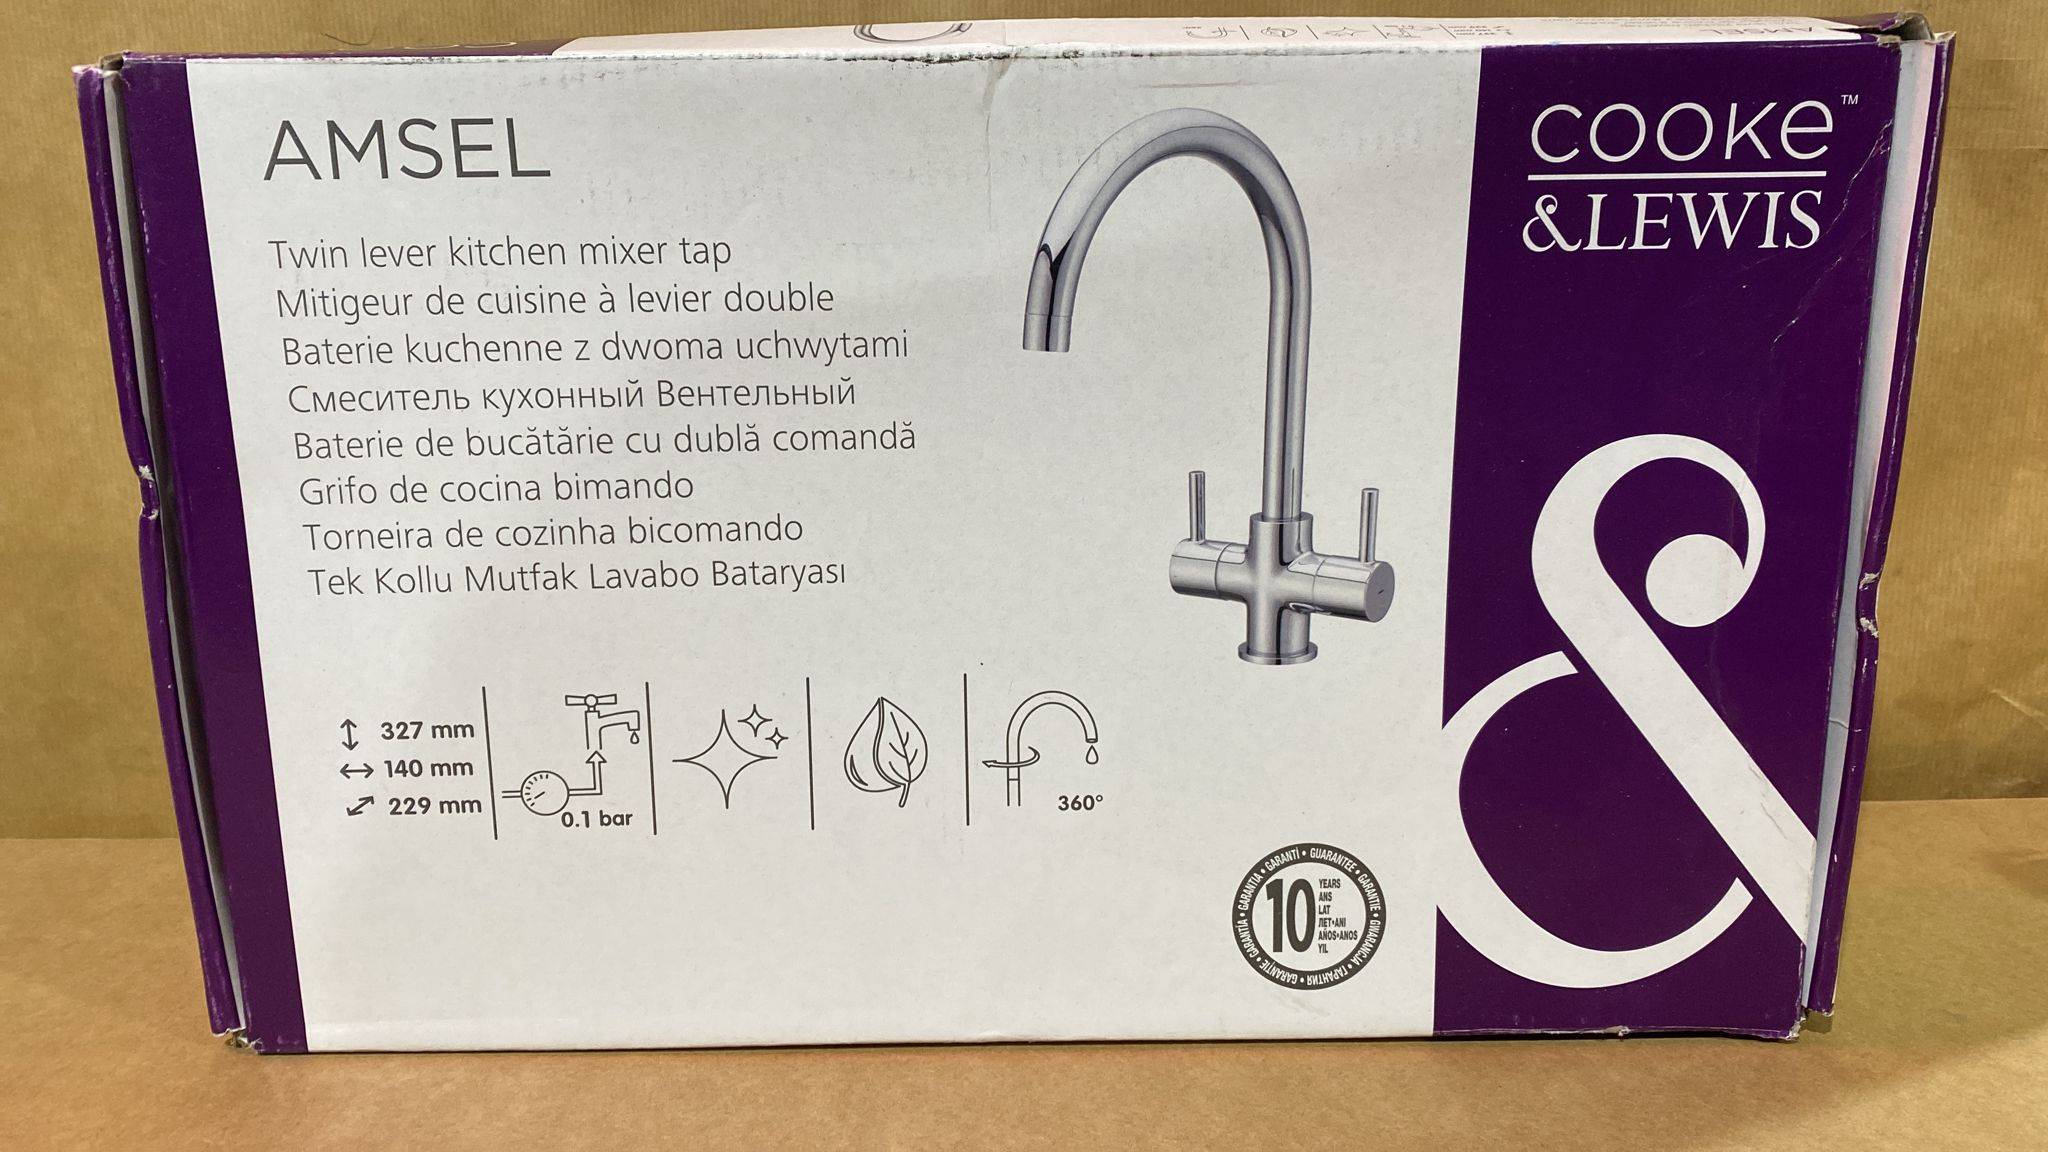 Cooke & Lewis Amsel Chrome effect Kitchen Twin lever Tap ¼ turn handle 0303